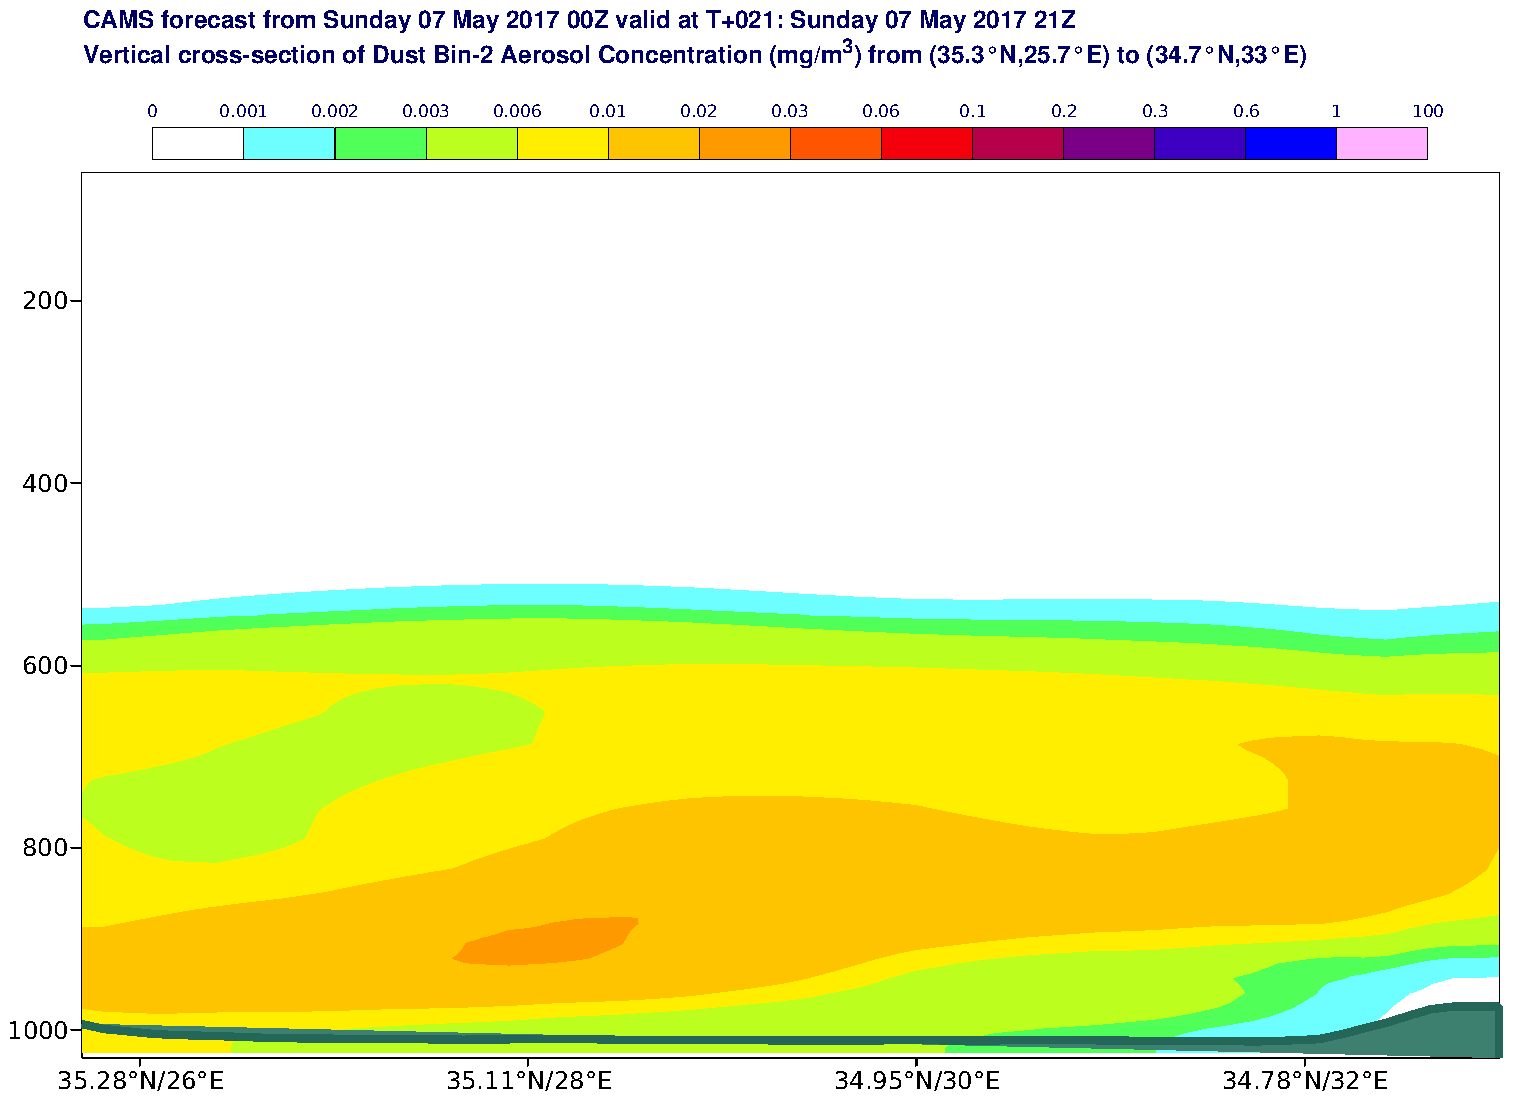 Vertical cross-section of Dust Bin-2 Aerosol Concentration (mg/m3) valid at T21 - 2017-05-07 21:00